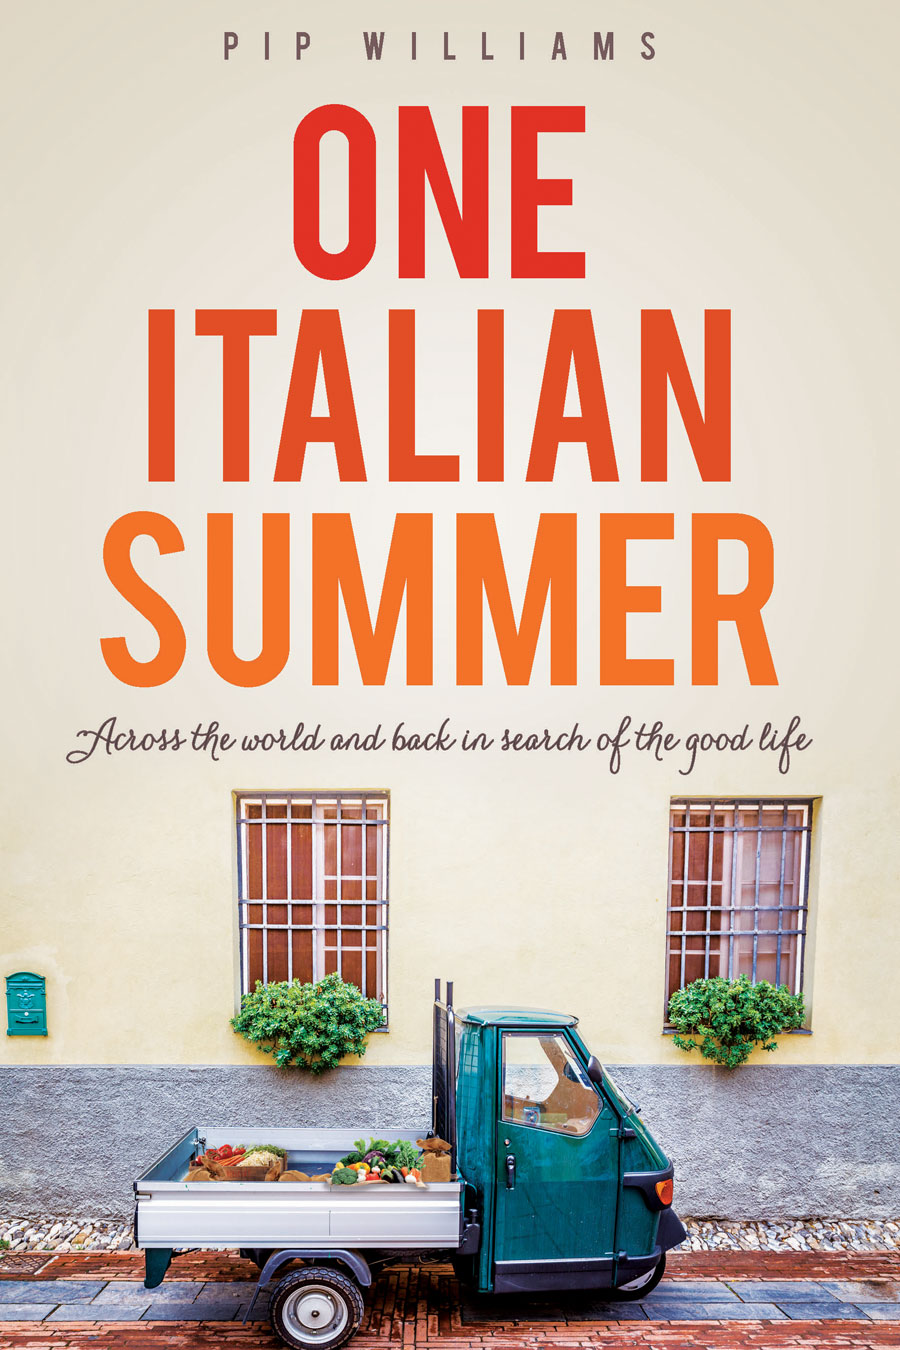 One Italian Summer, by Pip Williams, published by Affirm Press.